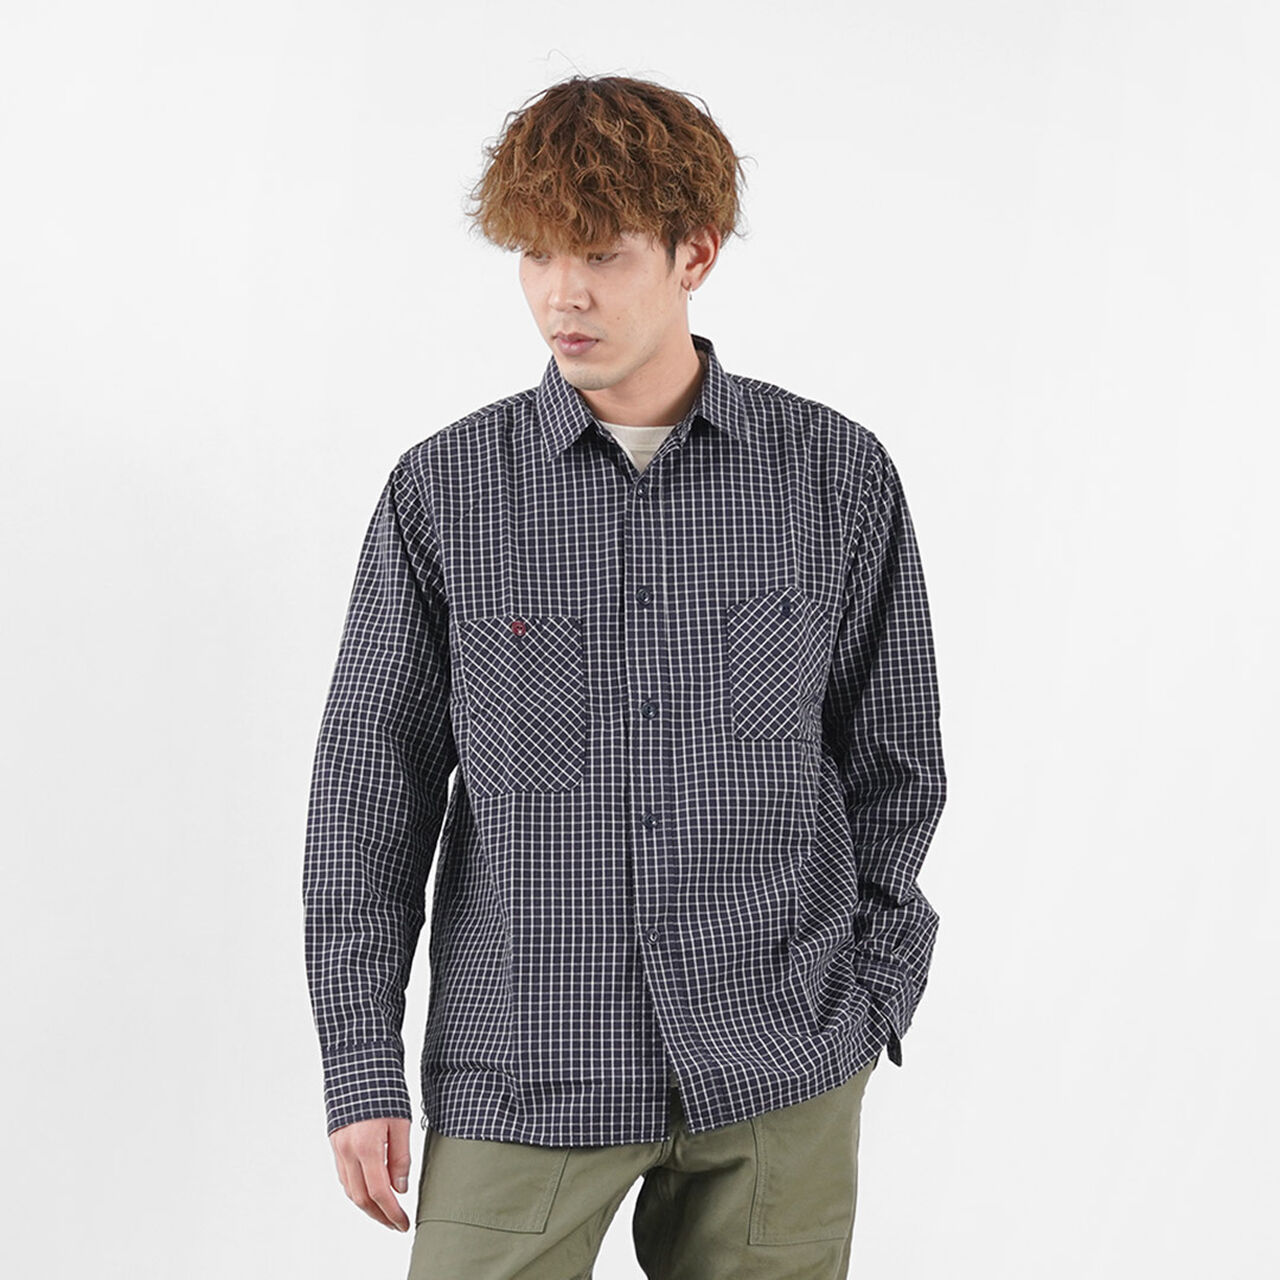 F3489 GRAPH CHECK WORK SHIRT,Navy, large image number 0